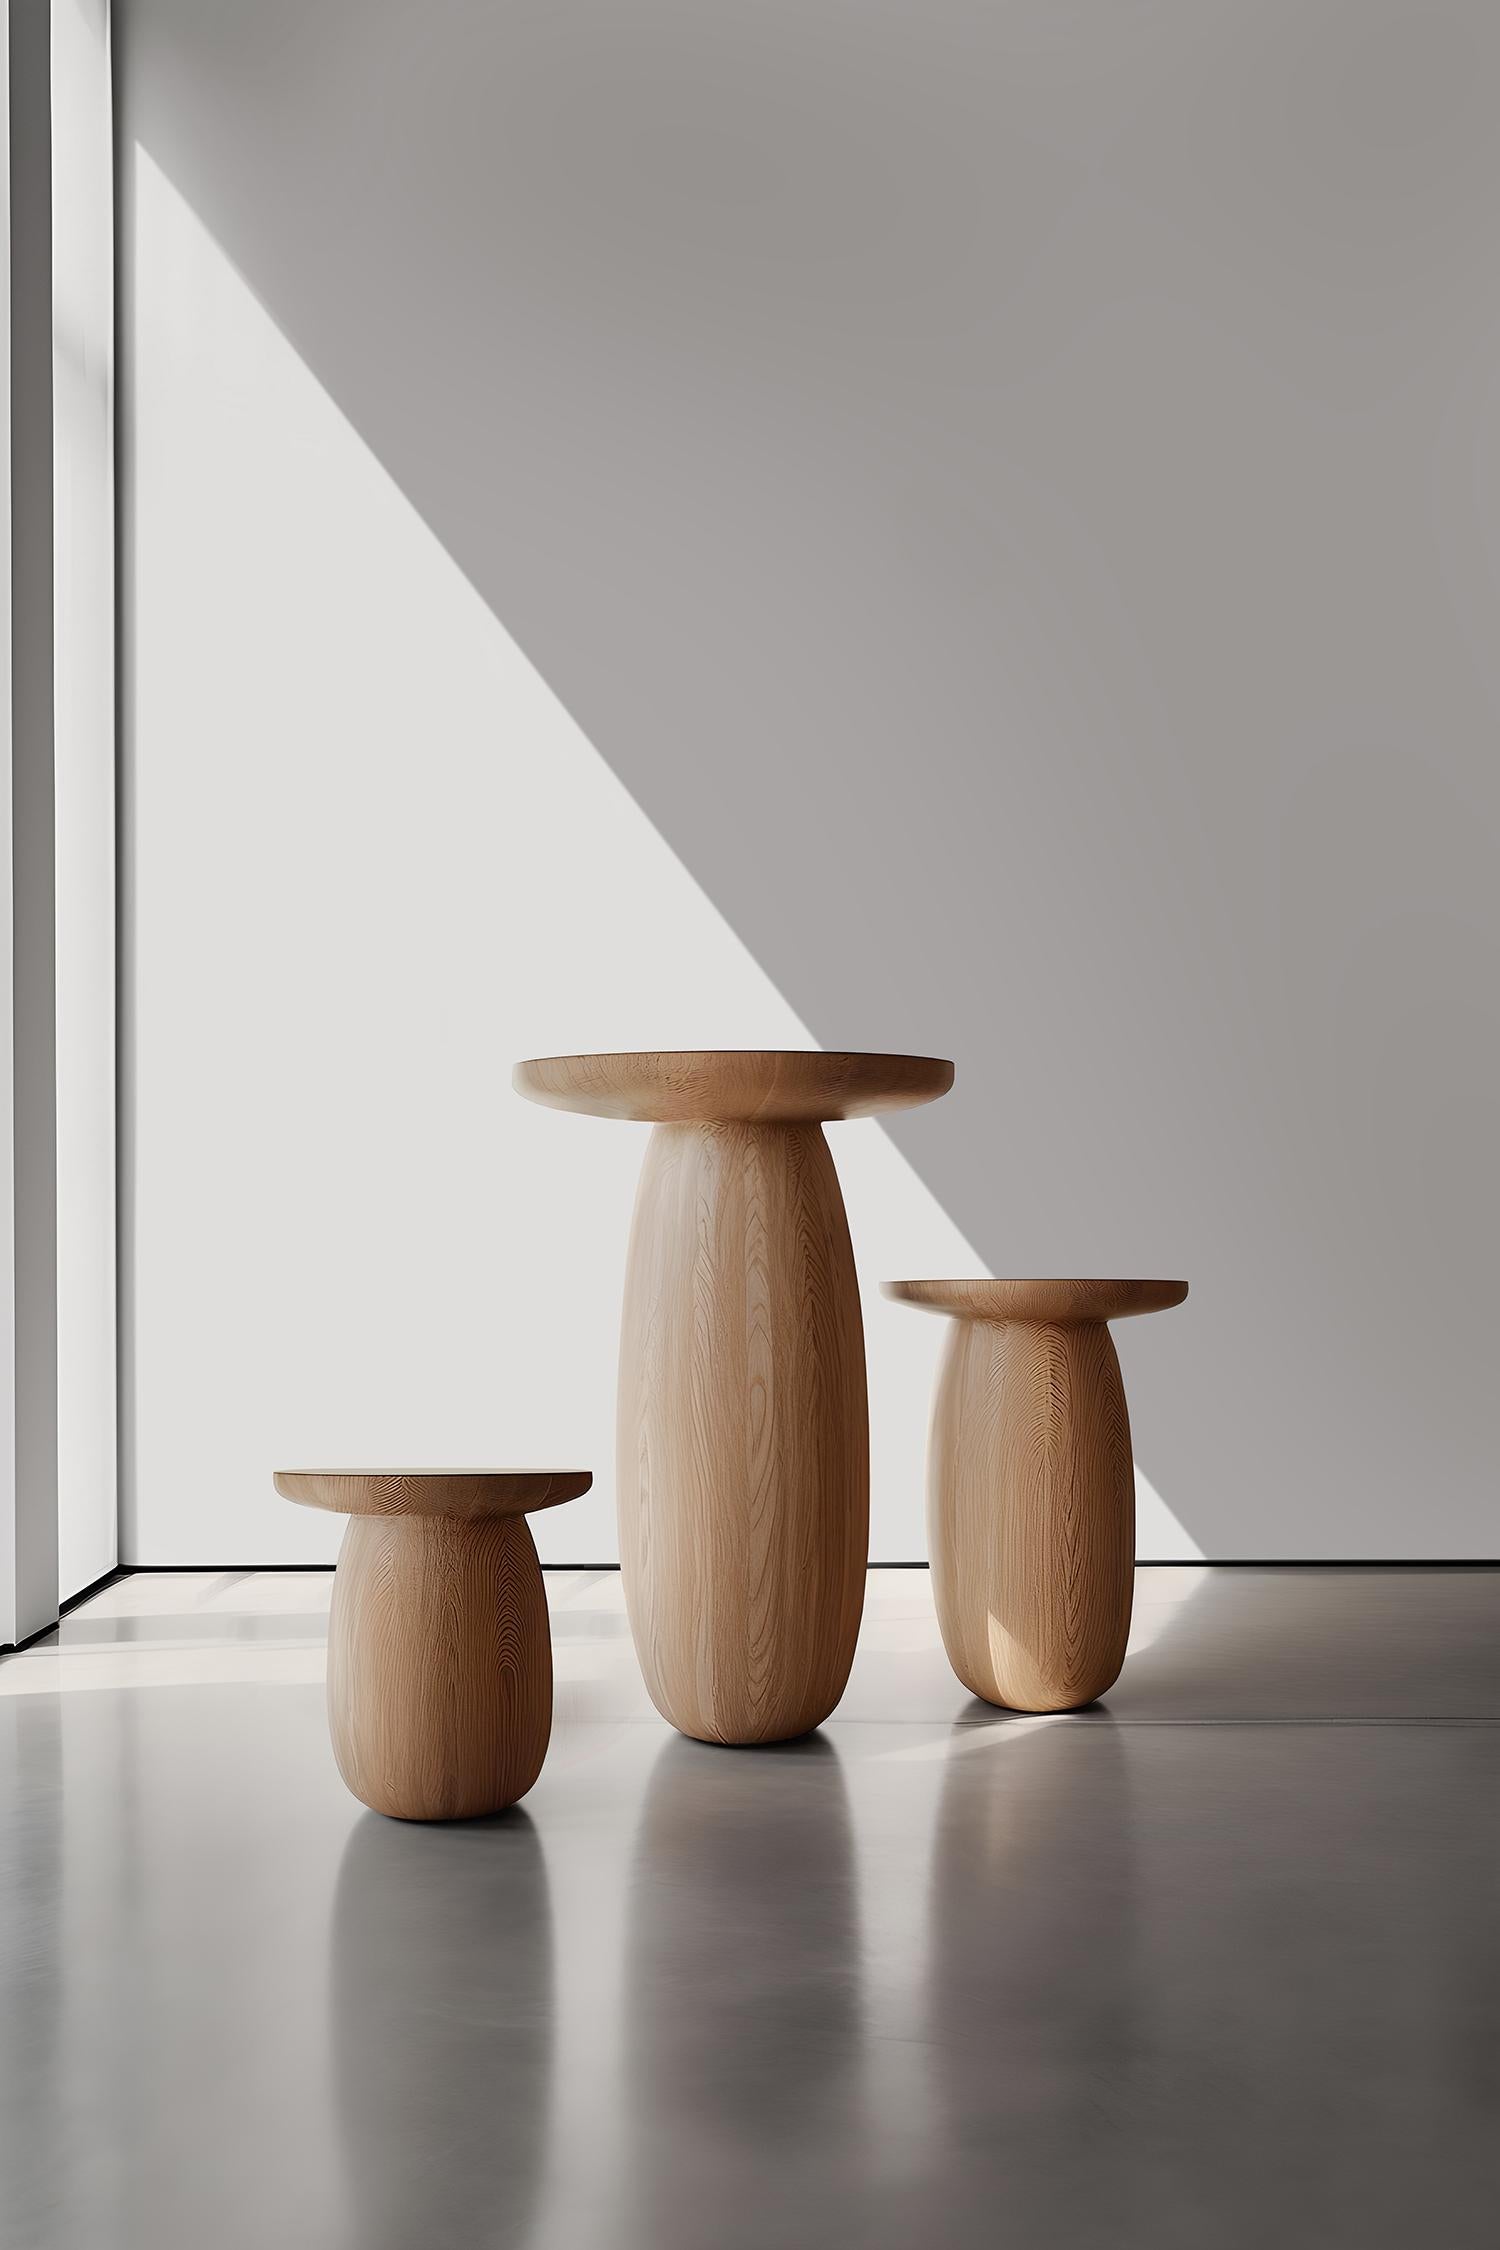 Mexican Set of 3 Small Tables, Side Tables, End Tables Samu Made of Solid Wood by Nono For Sale